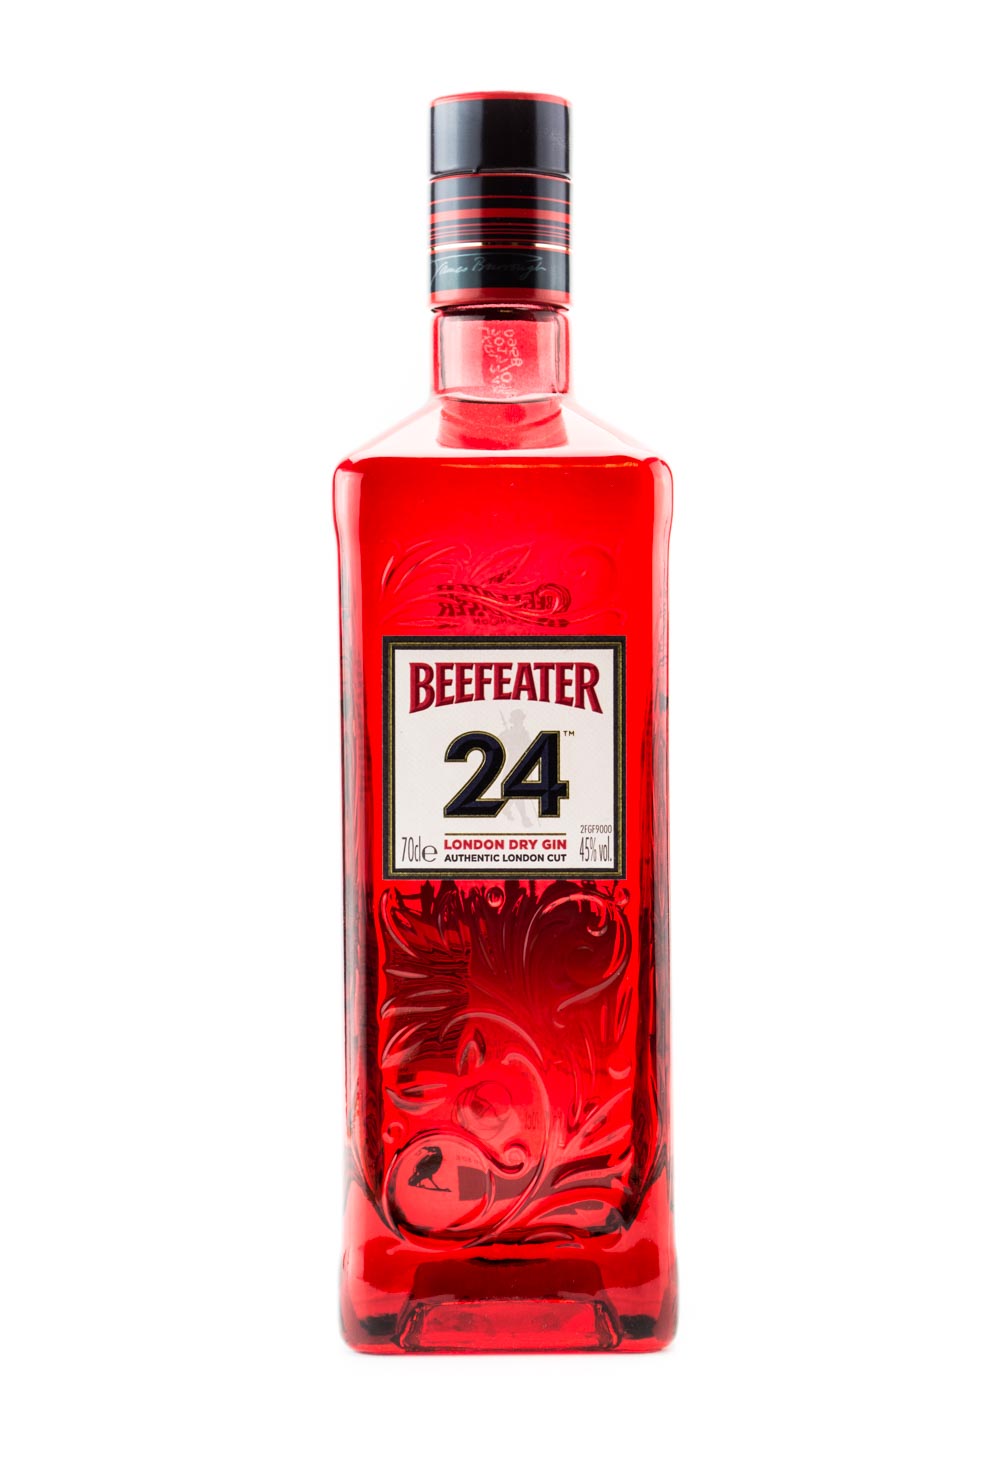 Beefeater 24 London Dry Gin - 0,7L 45% vol